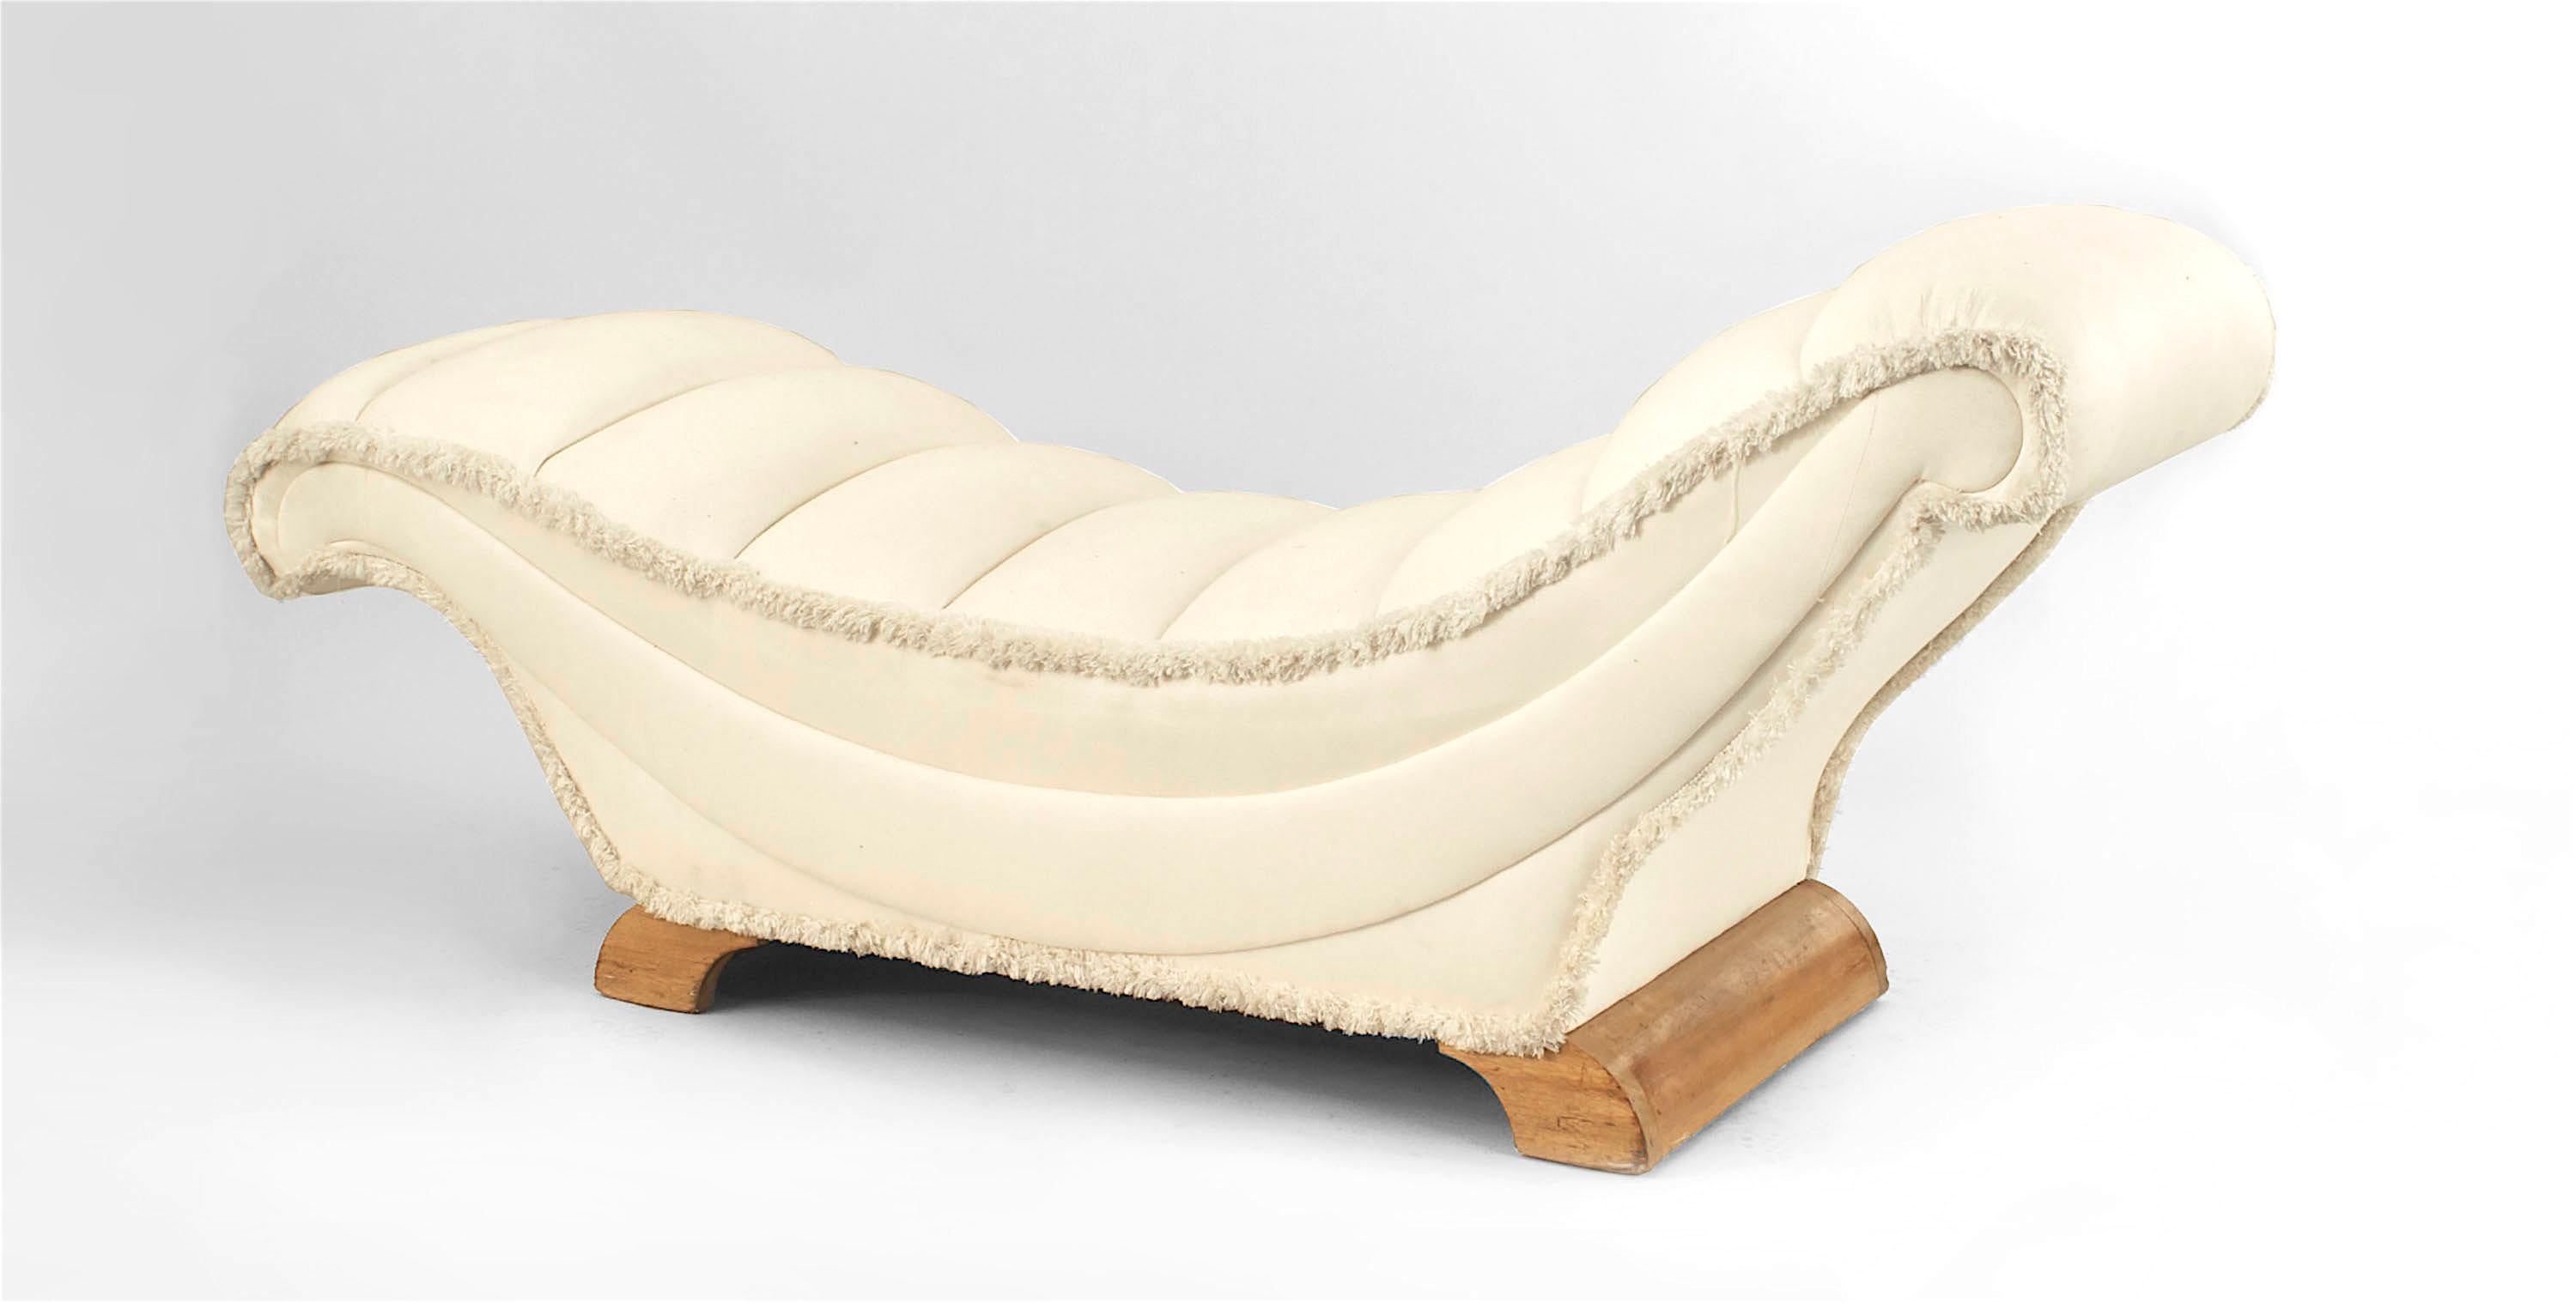 English Art Deco maple recamier of sleigh form upholstered in white cotton with fringed edge (Attributed to BETTY JOEL)
